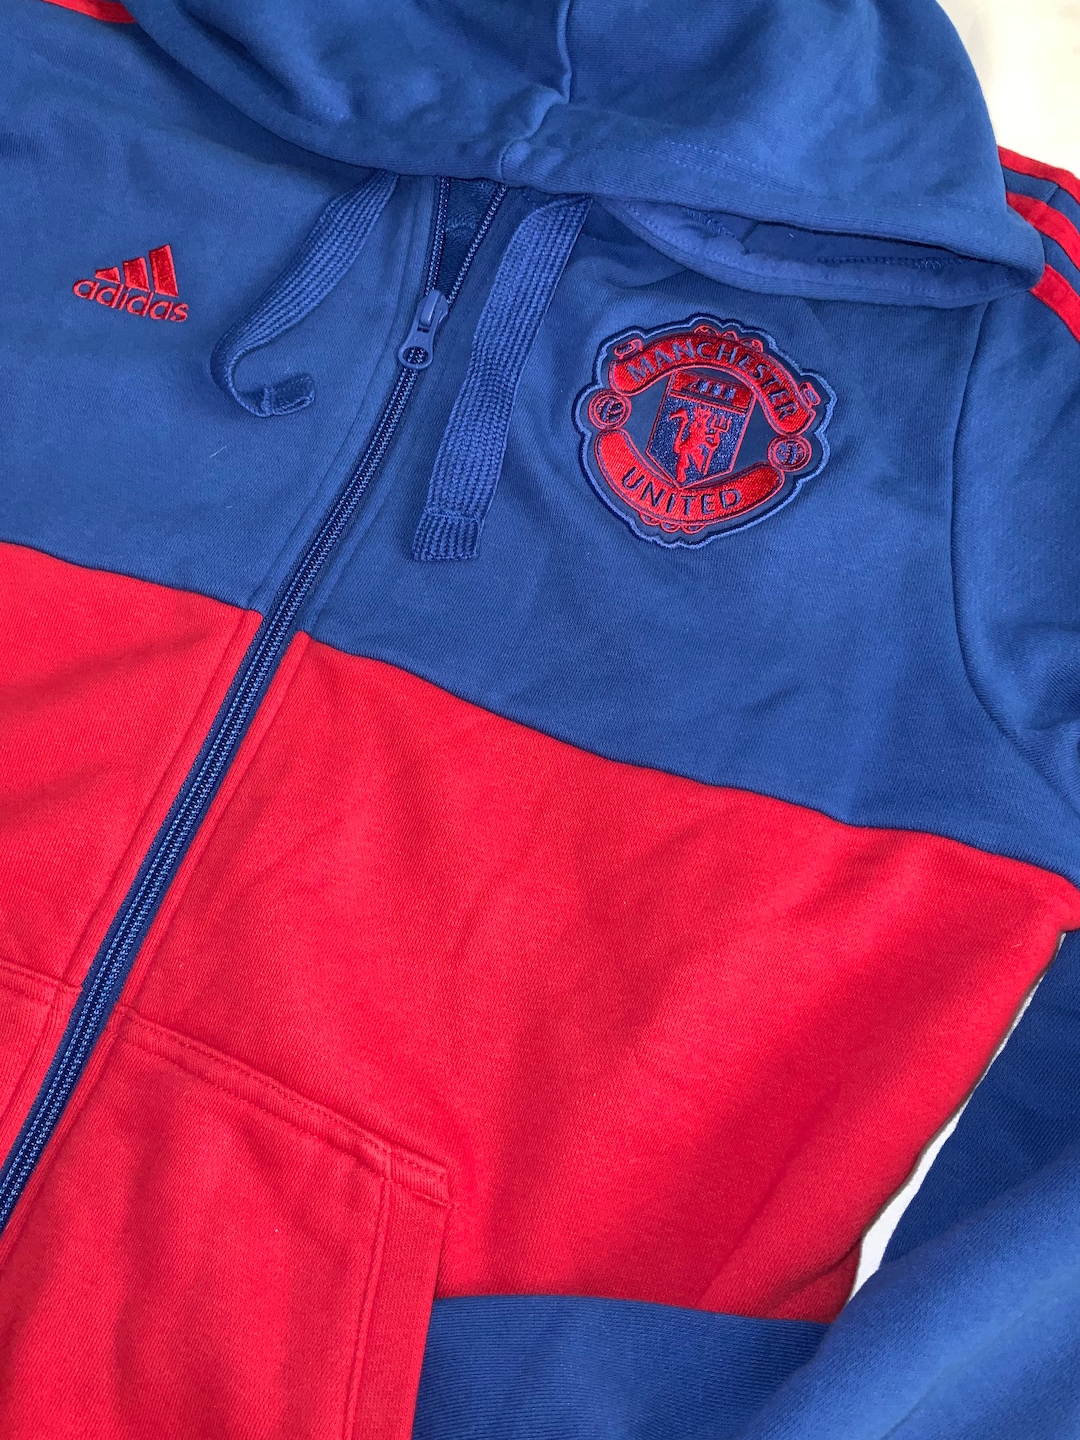 Hoodie Adidas Manchester United Jumper, Nwot Manchester United Outfit ...